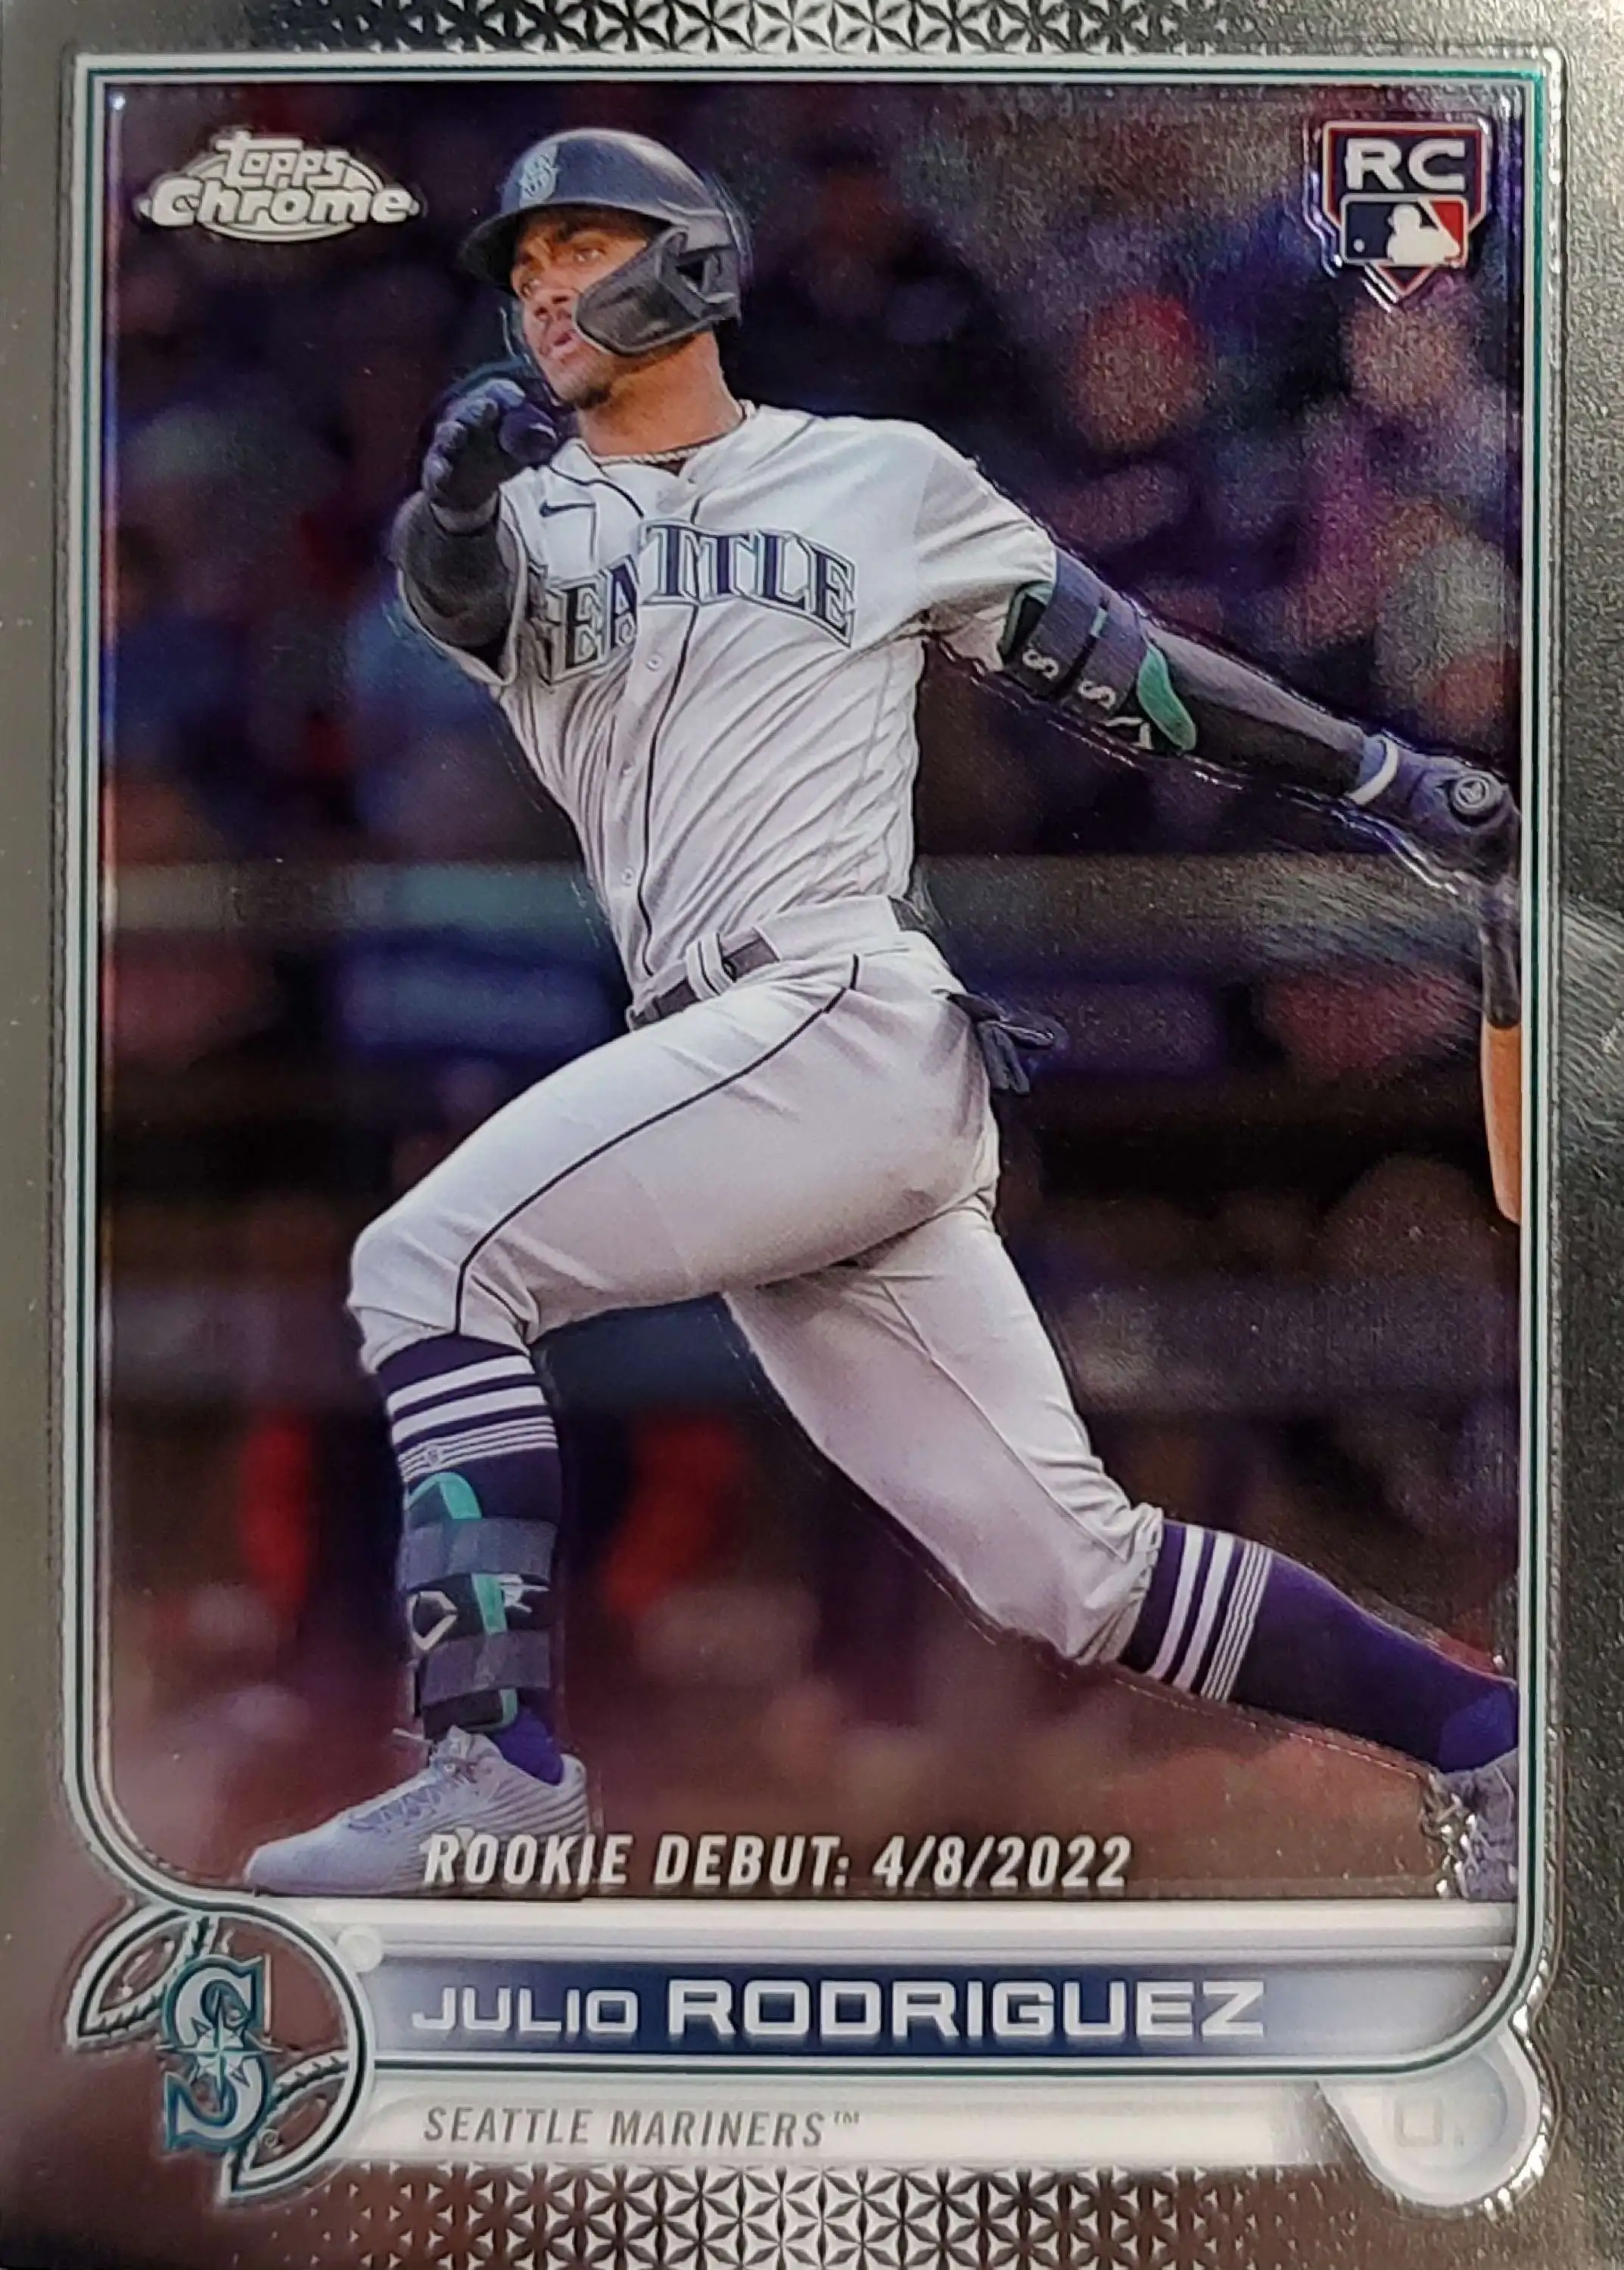 2022 TOPPS NOW #568 JULIO RODRIGUEZ ROOKIE ALL STAR HR RECORD